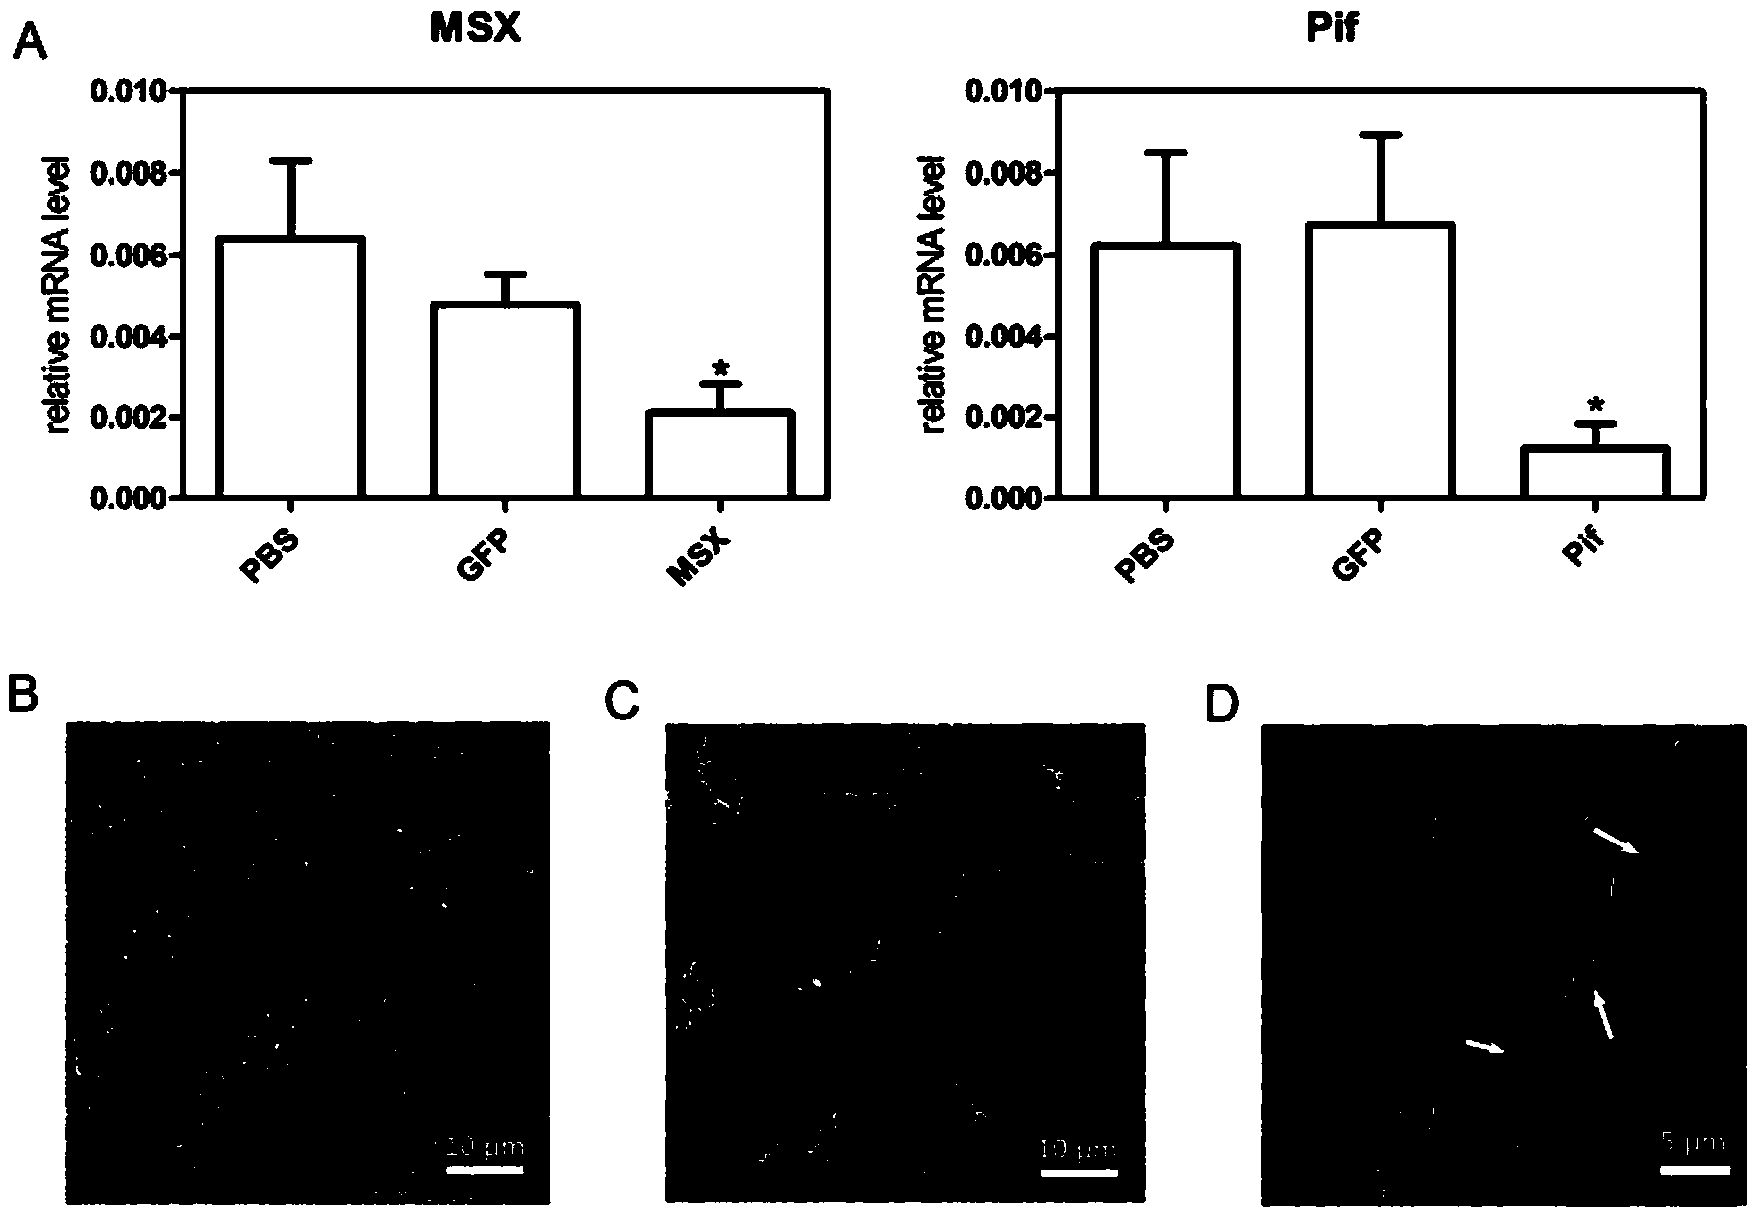 Pif promoter capable of being activated by pinctada martensii MSX (muscle segment homeobox) gene and application thereof